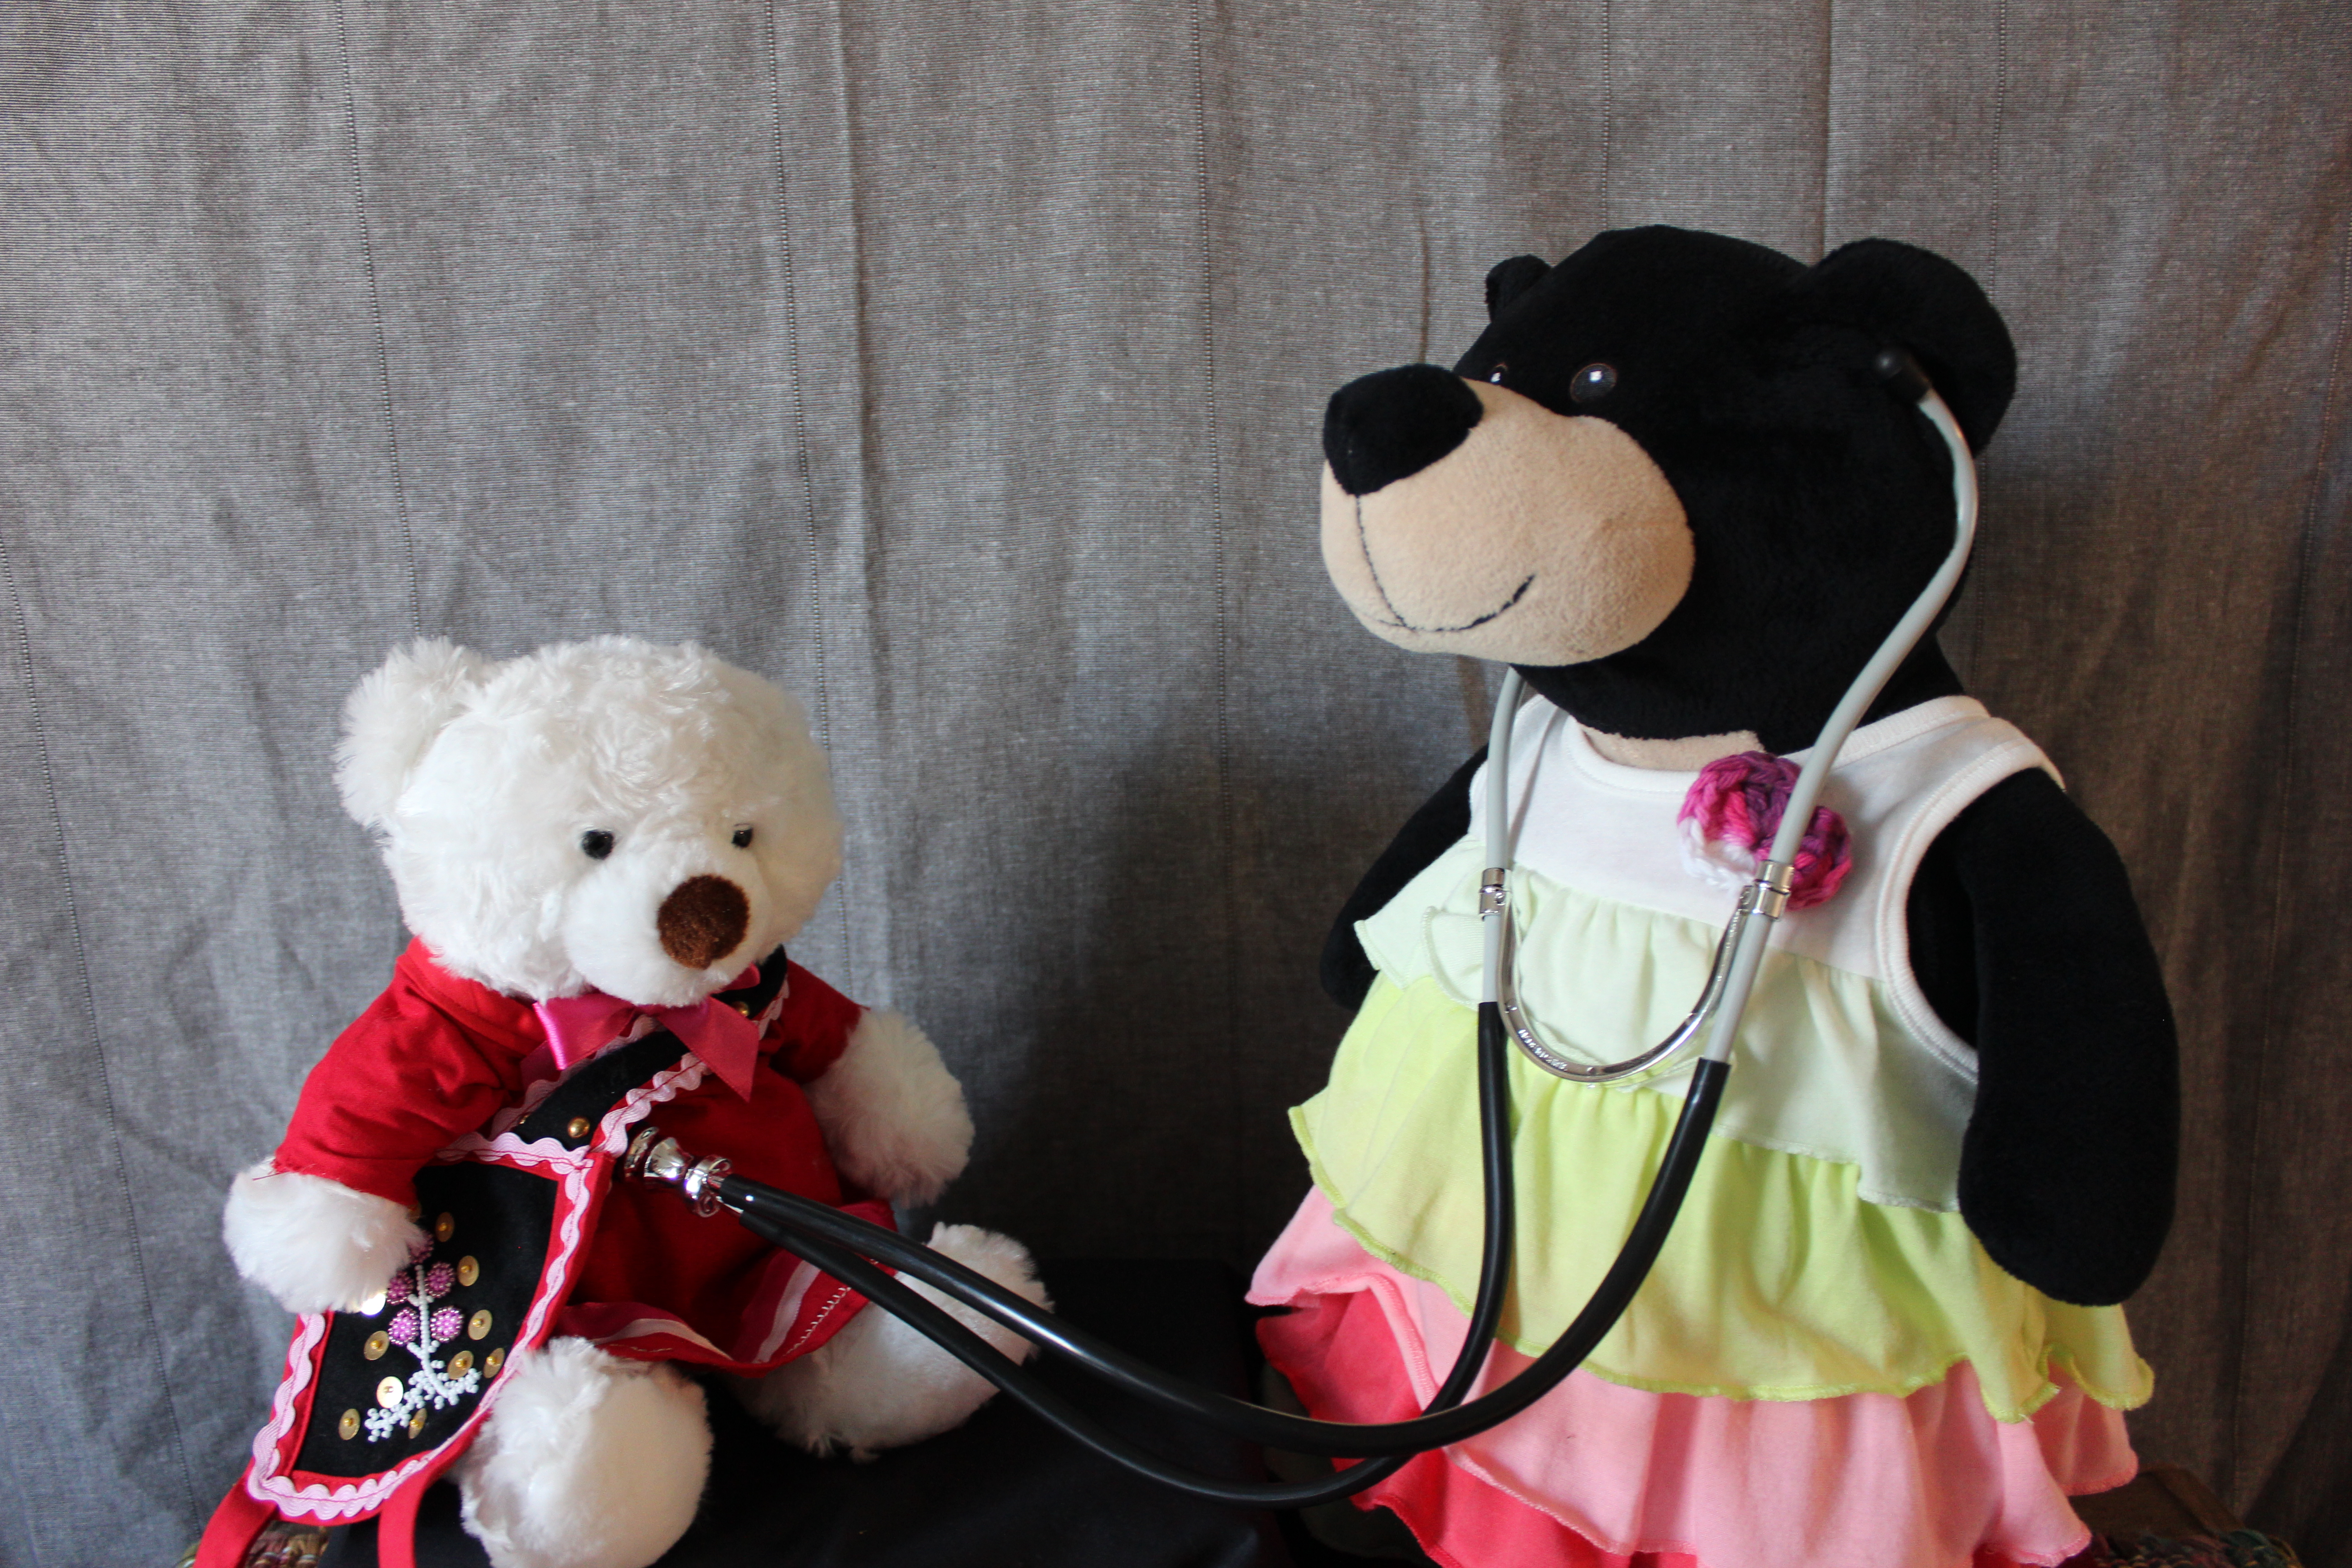 Mary the Bear would make a great doctor!